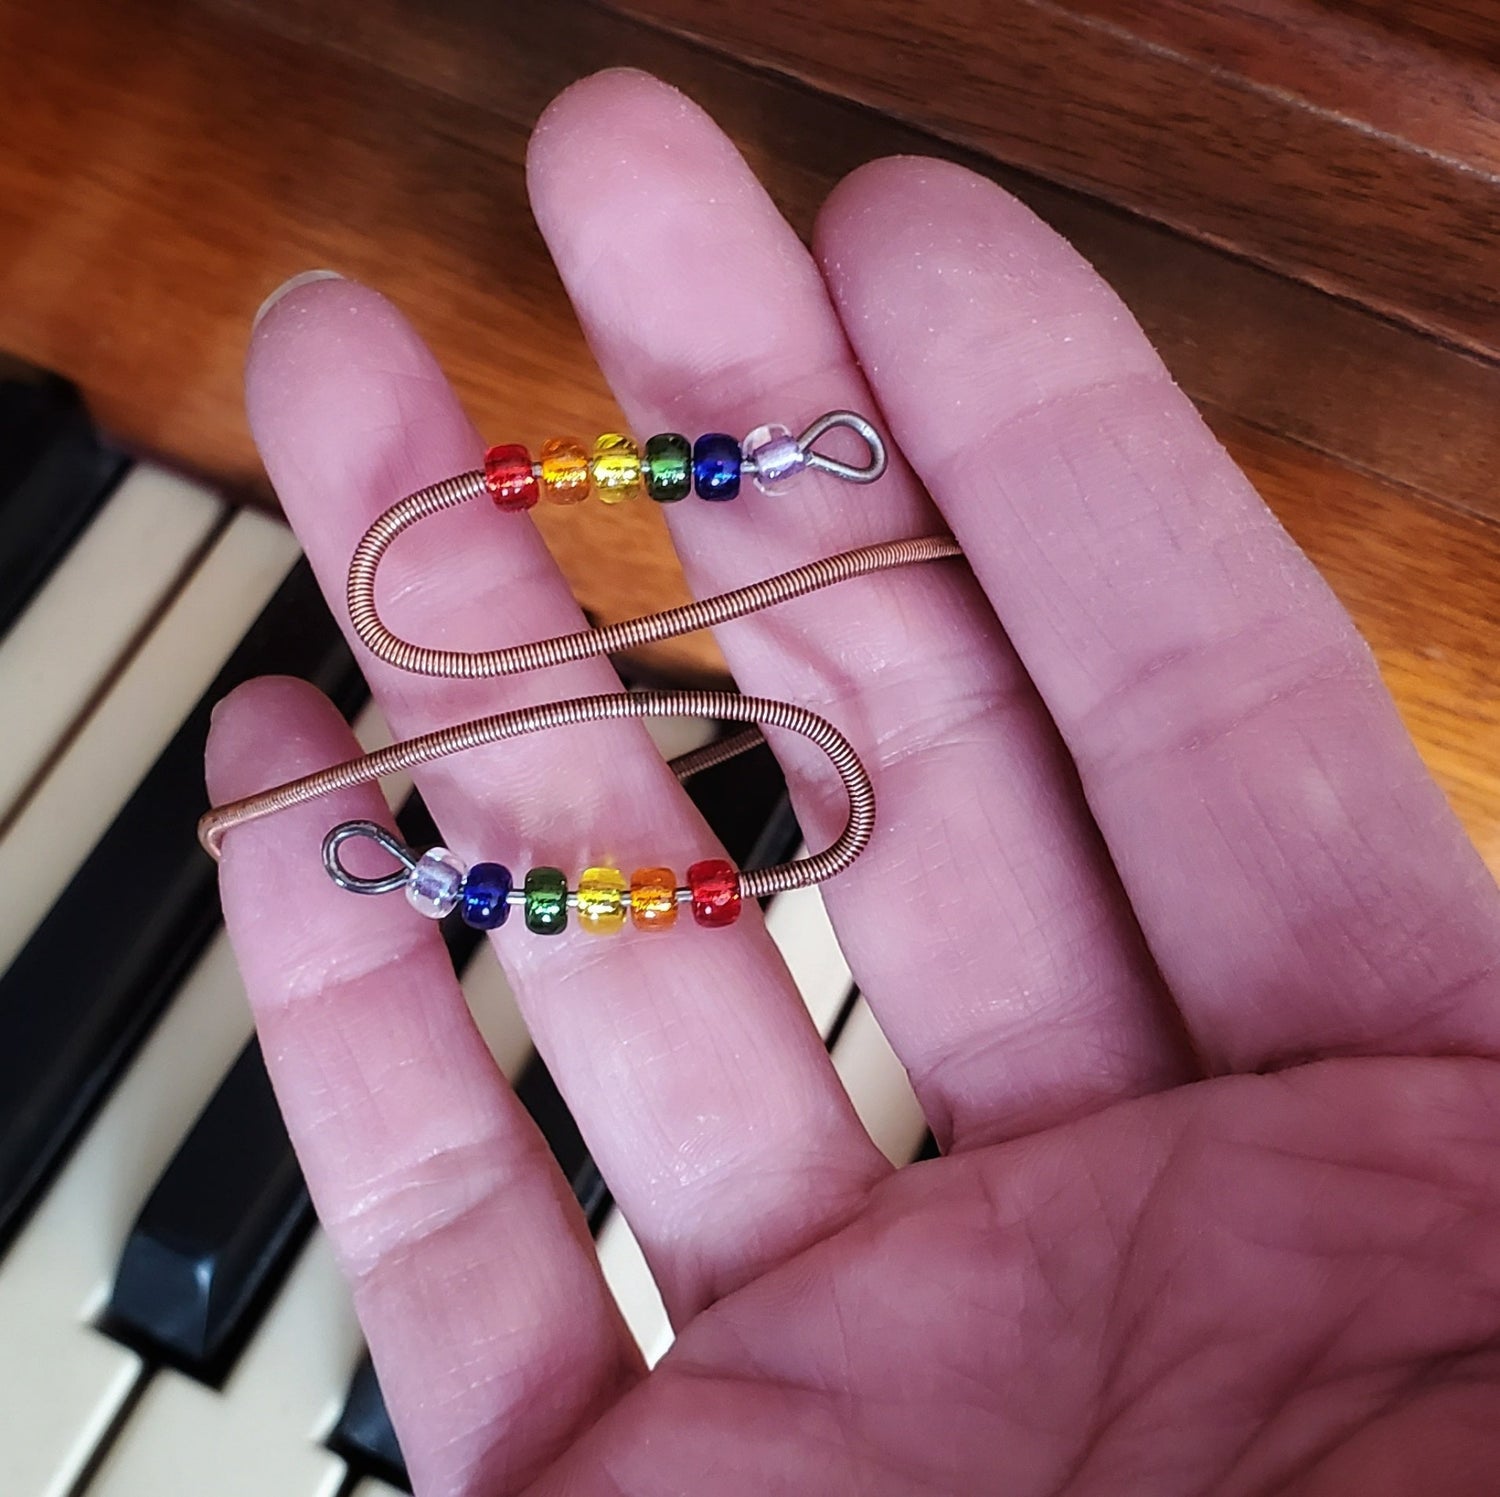 hand holding a cuff style bracelet made from upcycled piano strings and beads representing the LGBTQ pride flag